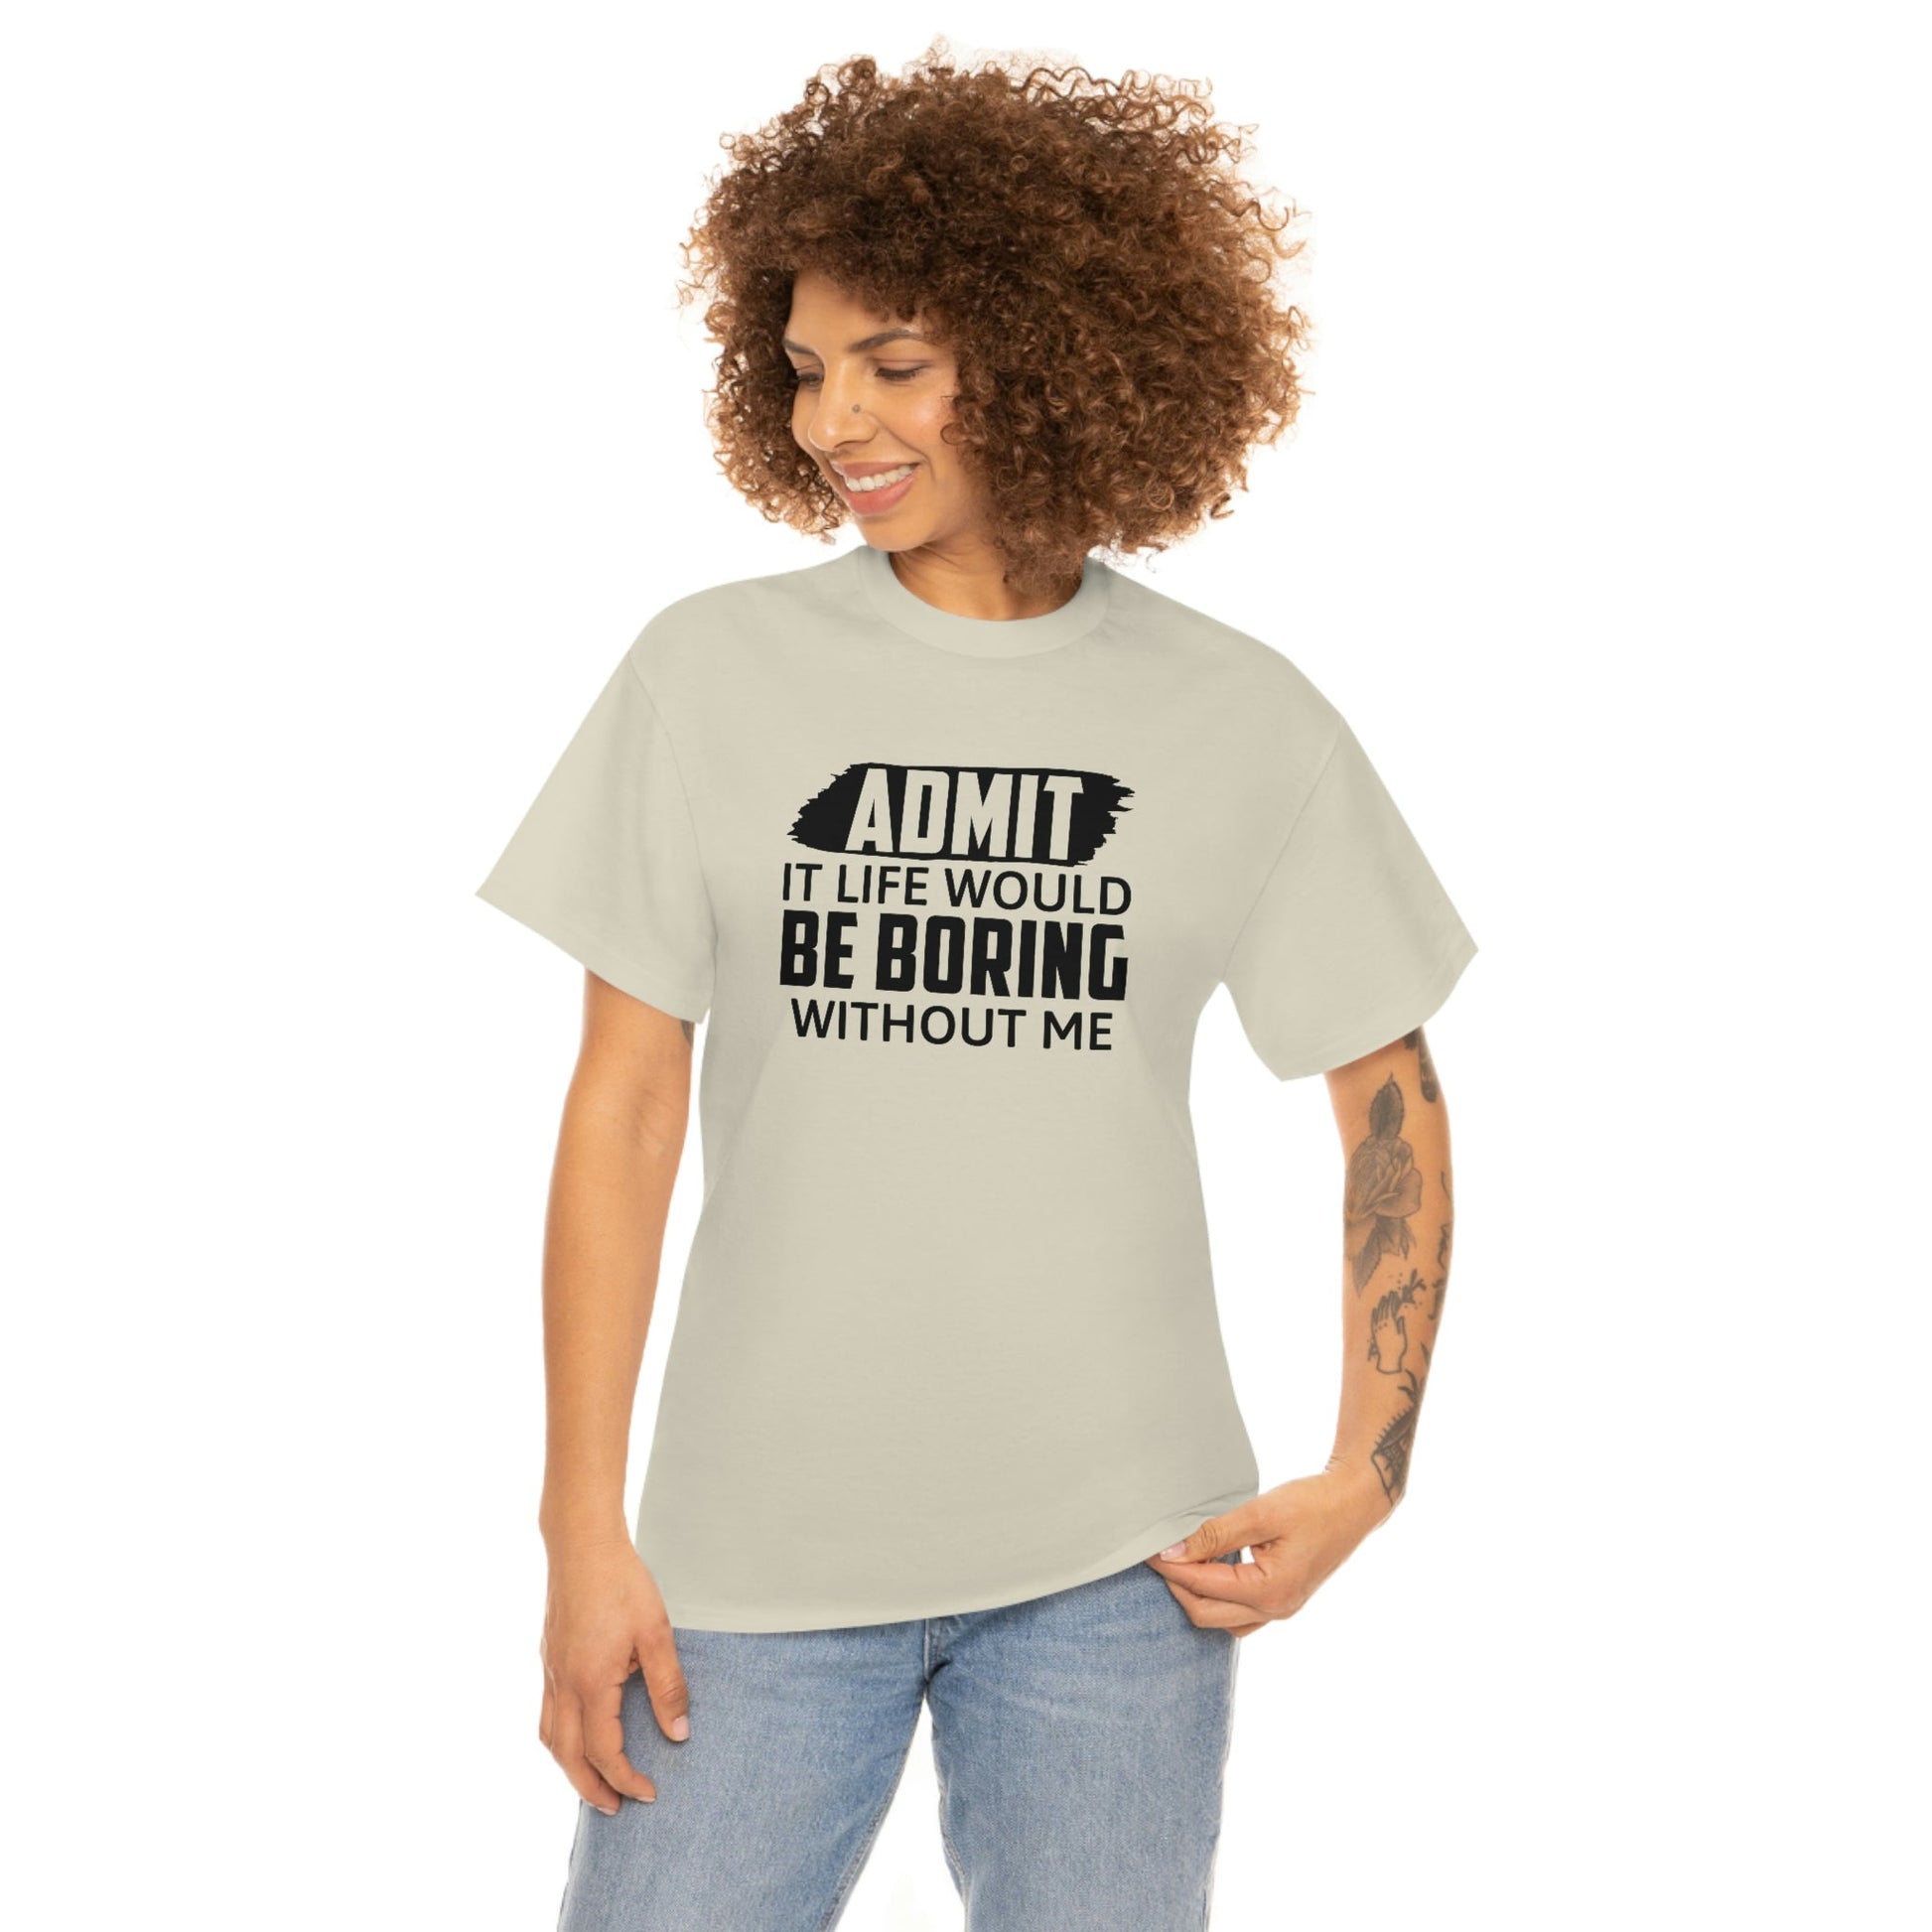 Life Would Be Boring Without Me Cotton Tee T-Shirt Pink Sweetheart